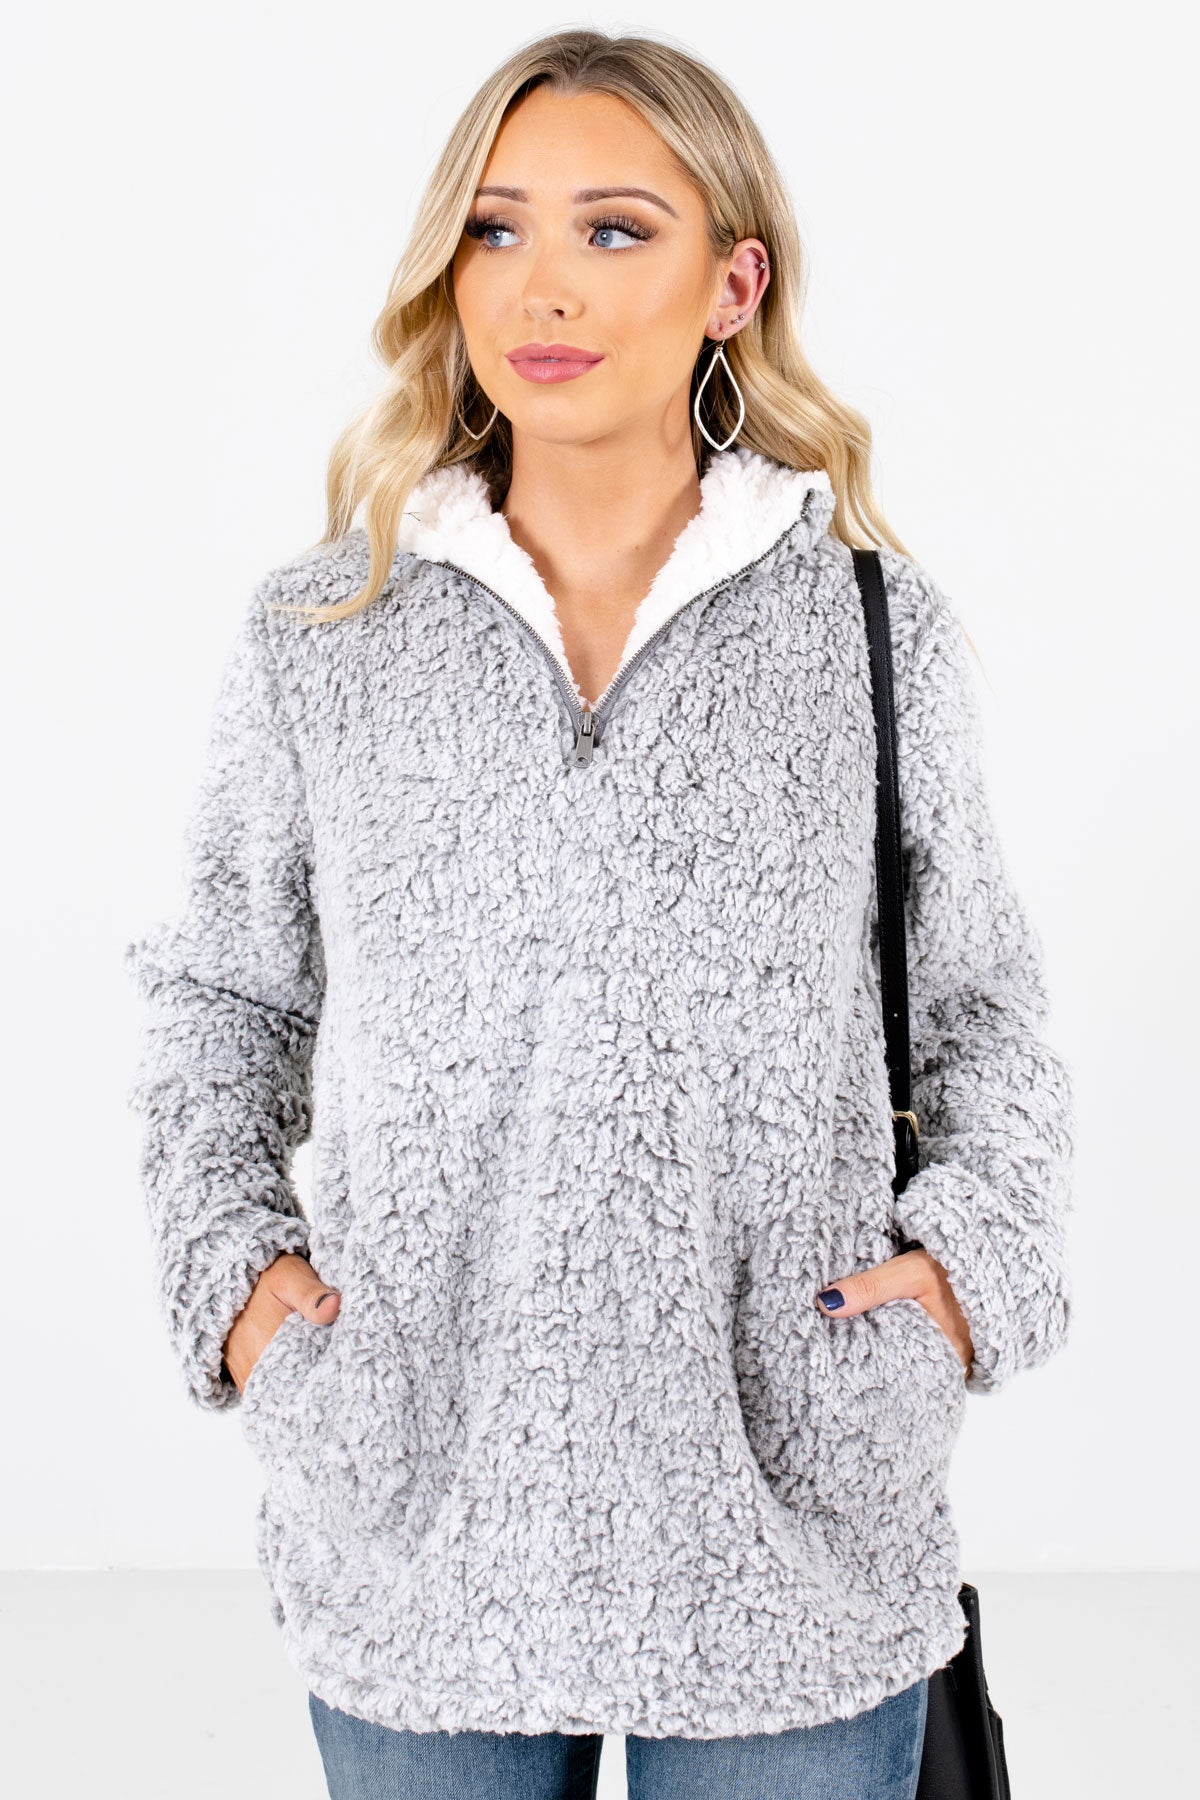 Gray Faux Sherpa Material Boutique Pullovers for Women